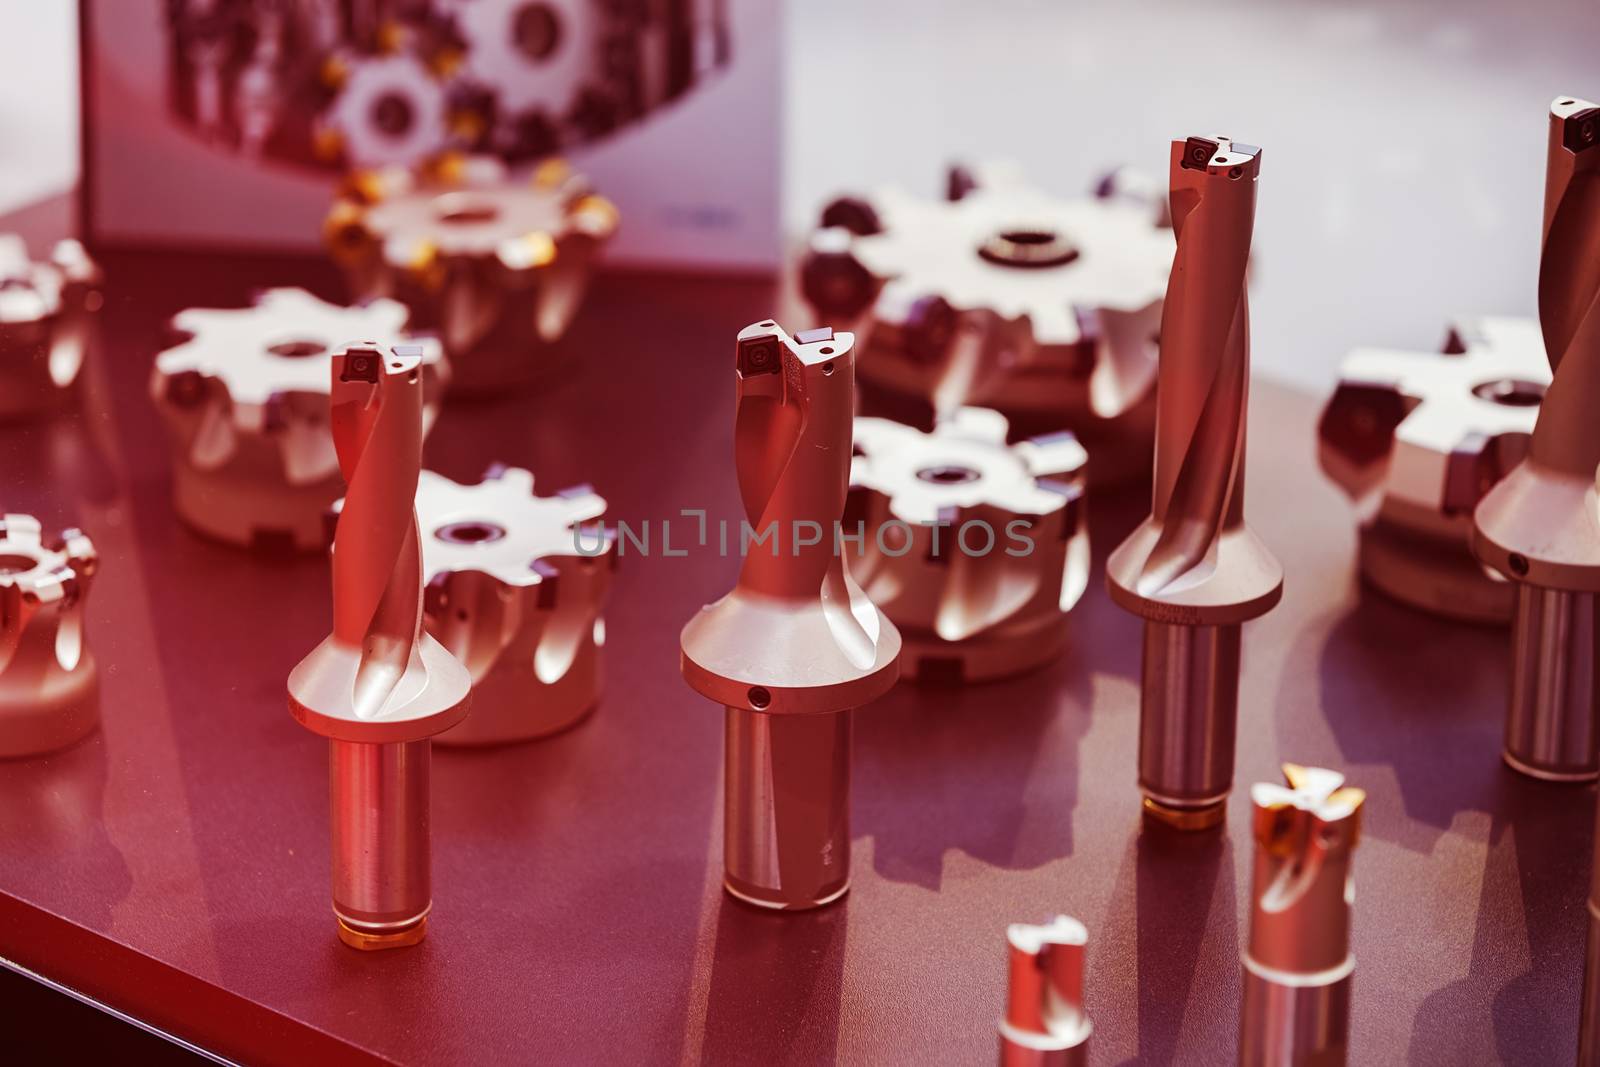 Various parts for lathe tools, note shallow depth of field